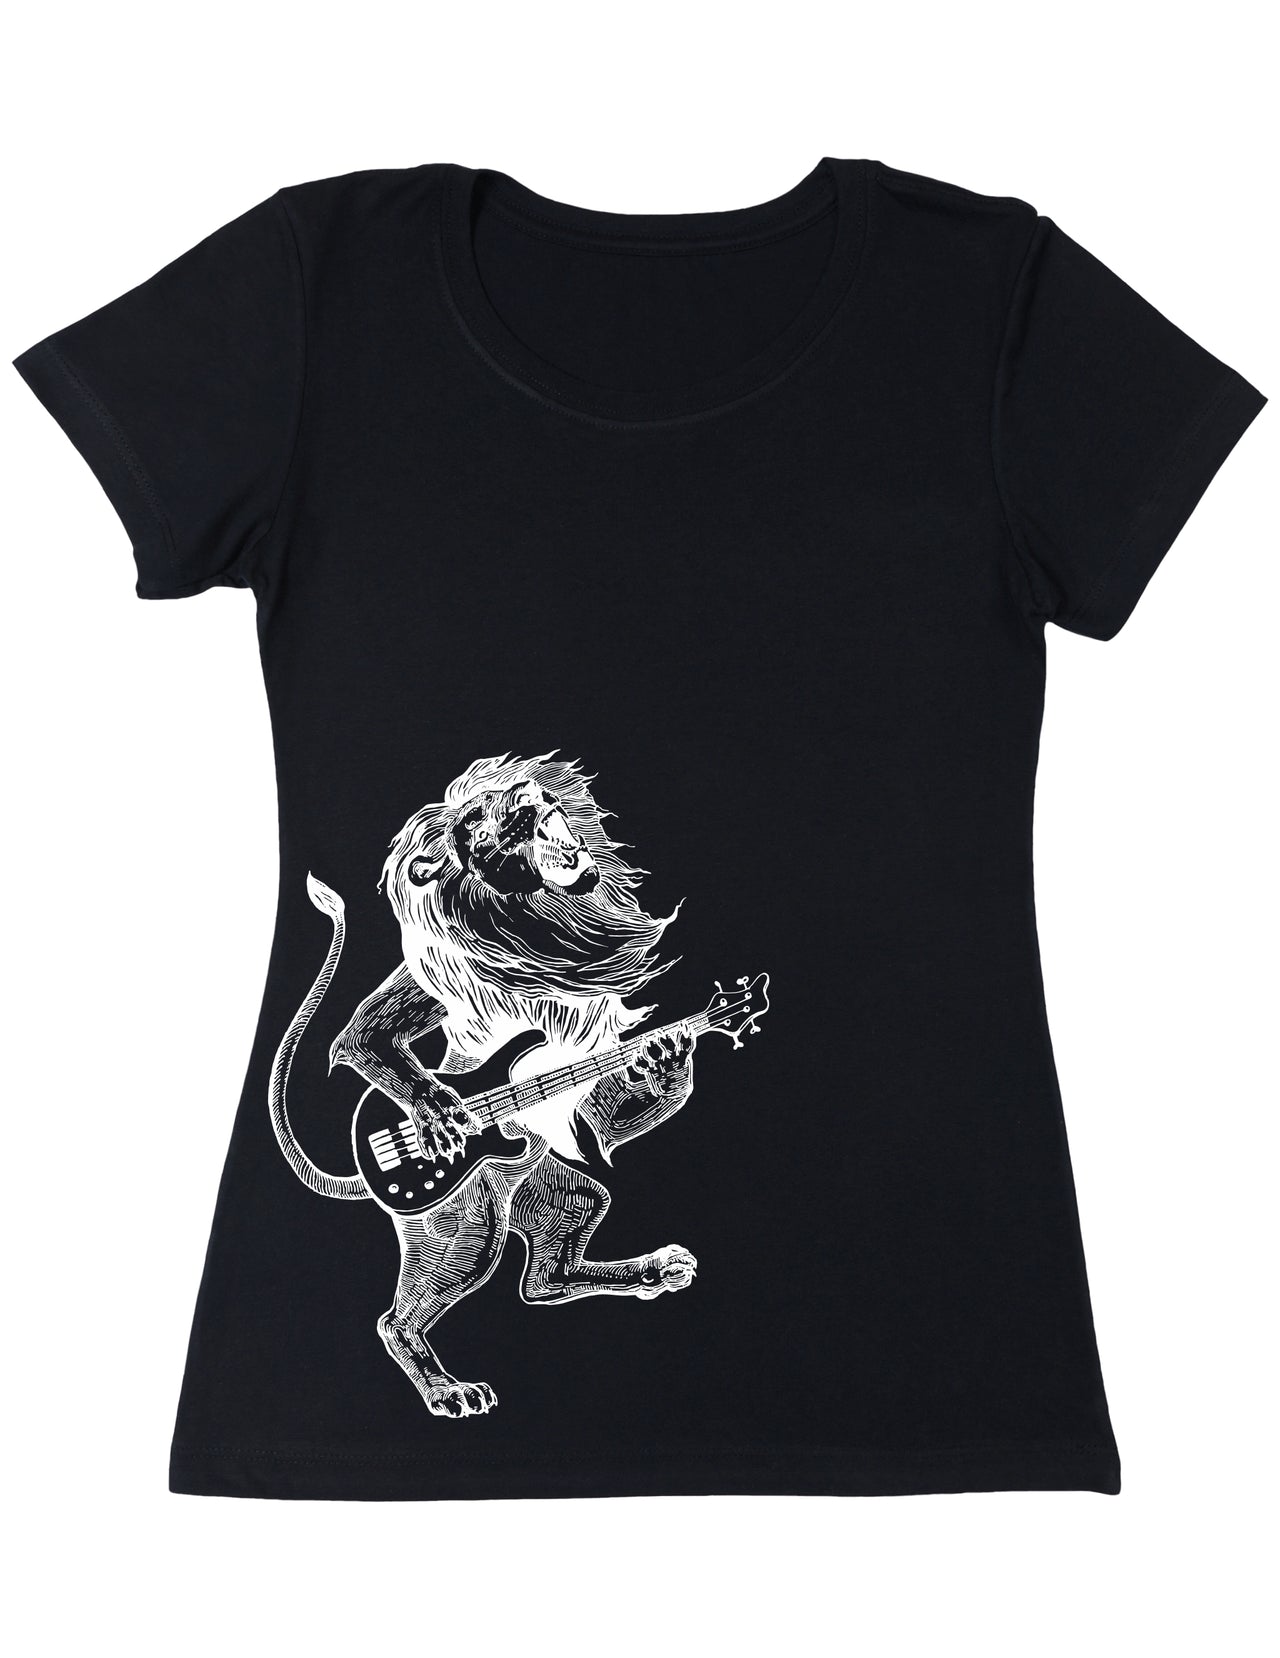 SEEMBO Lion Playing Guitar Funny Guitarist Musician Band Women Poly-Cotton T-Shirt Side Print